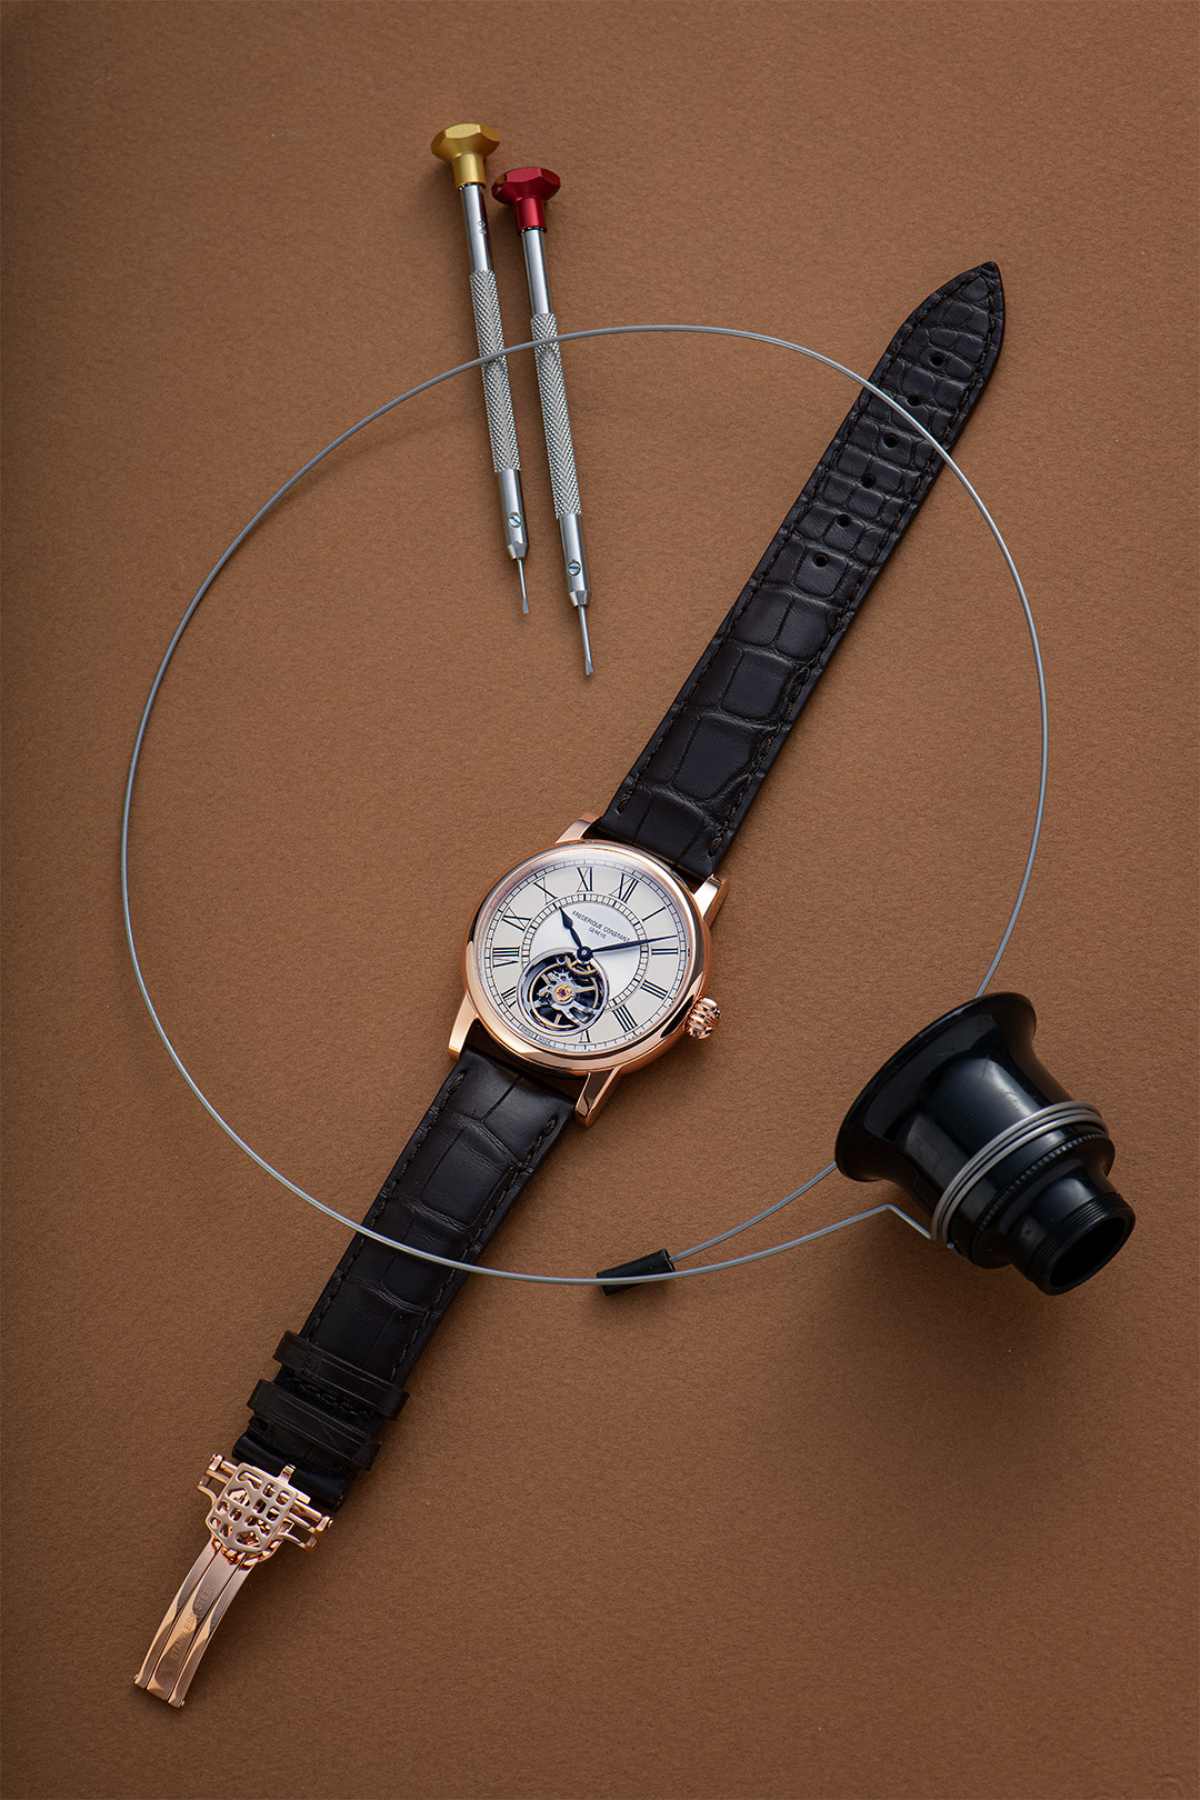 Classics Heart Beat Manufacture: A New Look For The Frederique Constant Icon